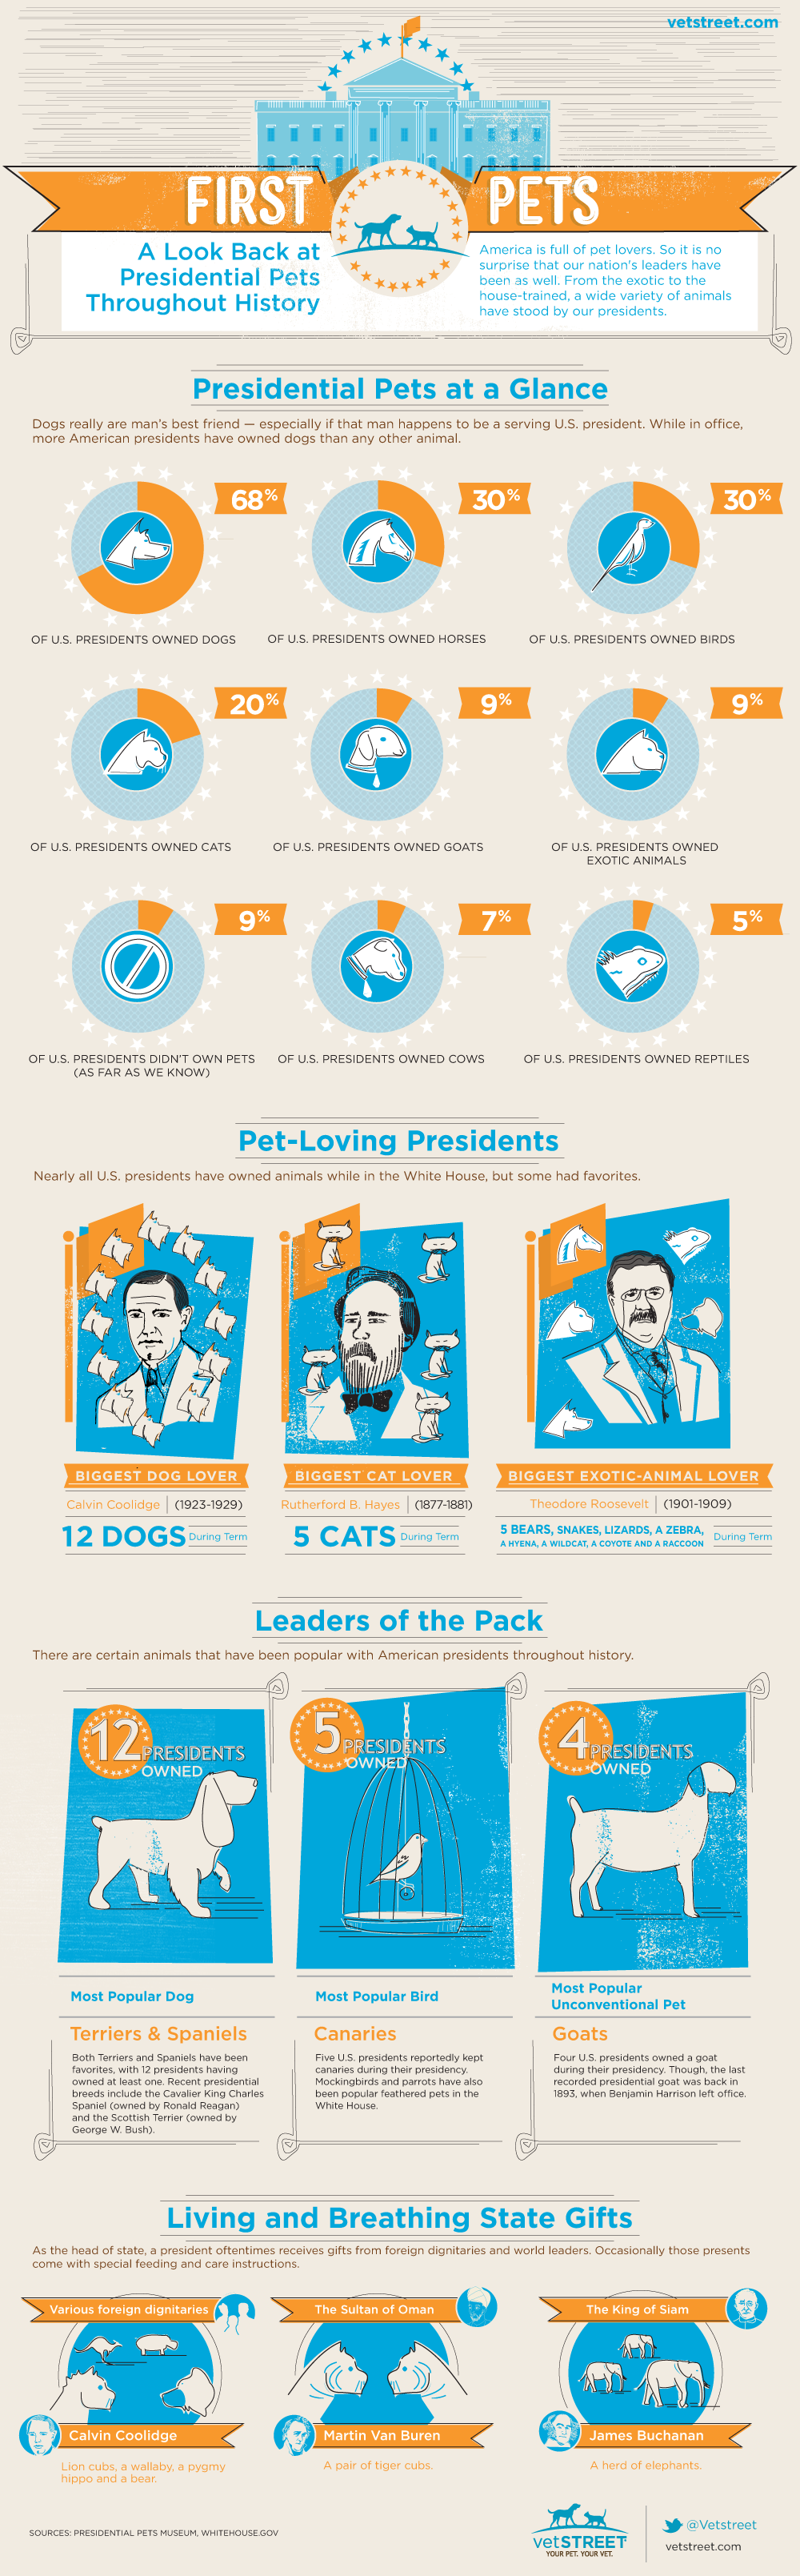 First Pets: Presidential Pets Throughout History